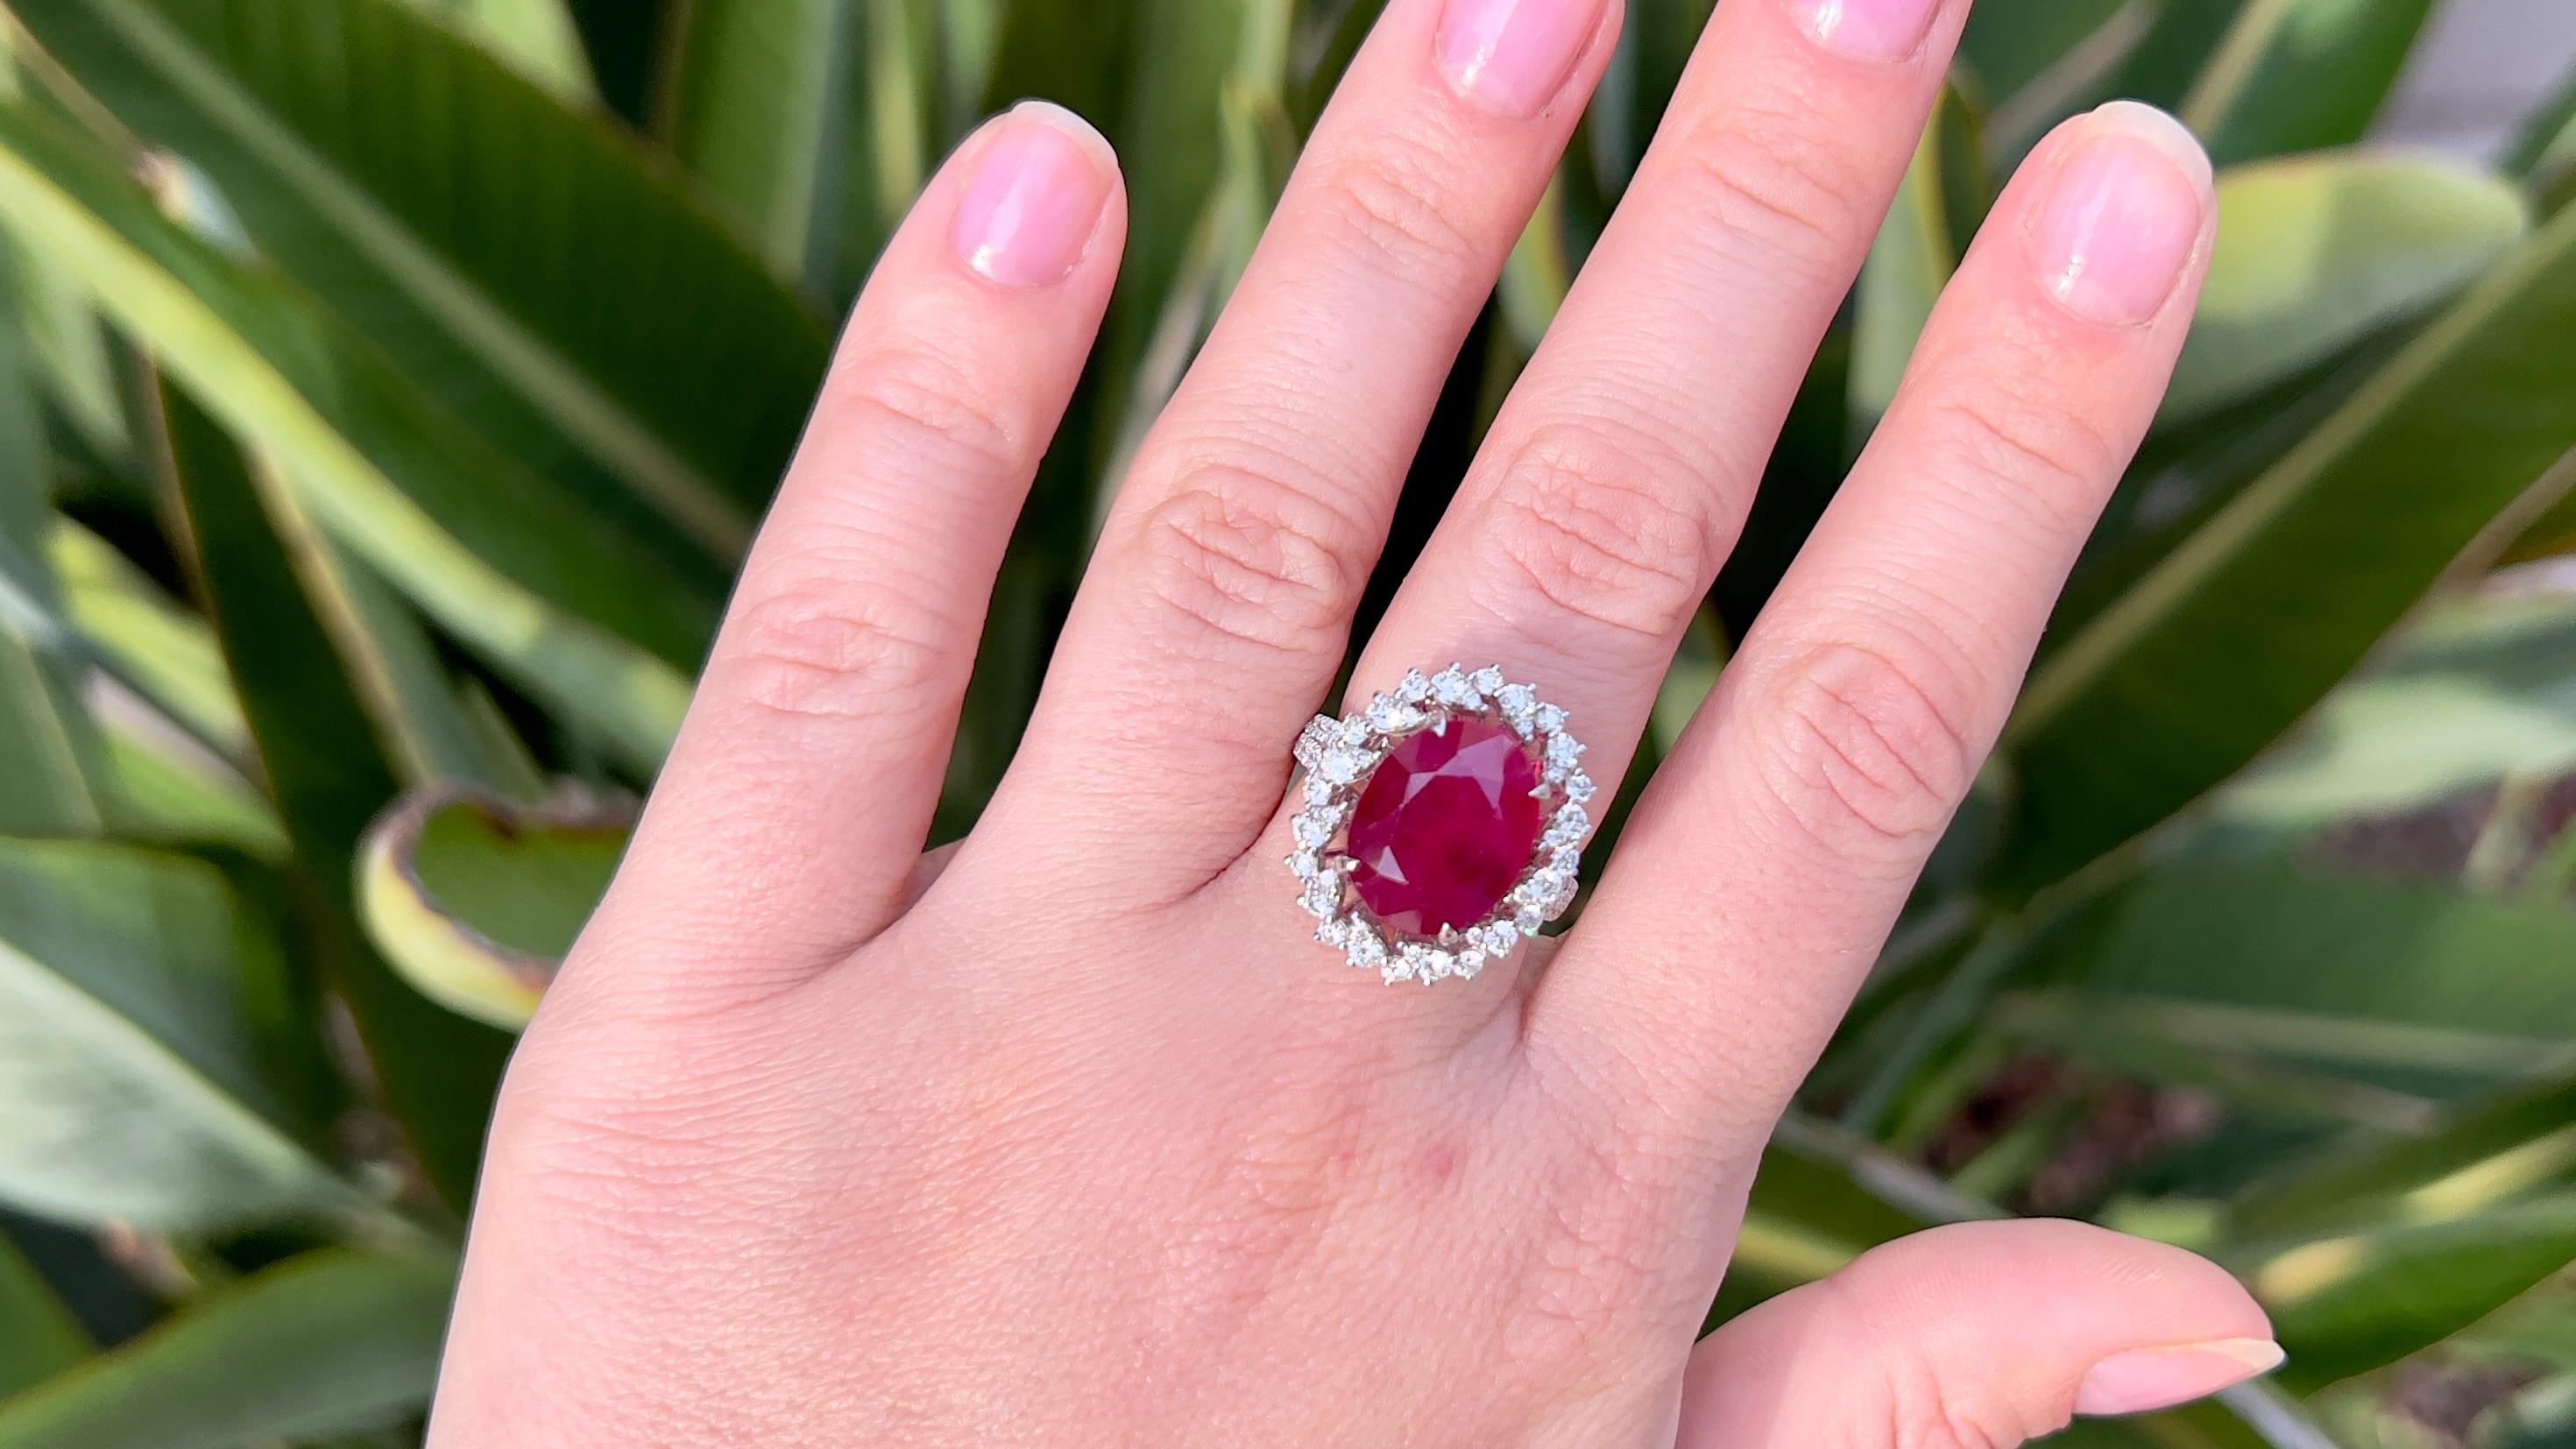 Ruby = 6.50 Carat 
Cut: Oval
Diamonds = 1.40 Carats
( Color: F, Clarity: VS )
Metal: 14K Gold
Ring Size: 6.75* US
*It can be resized complimentary